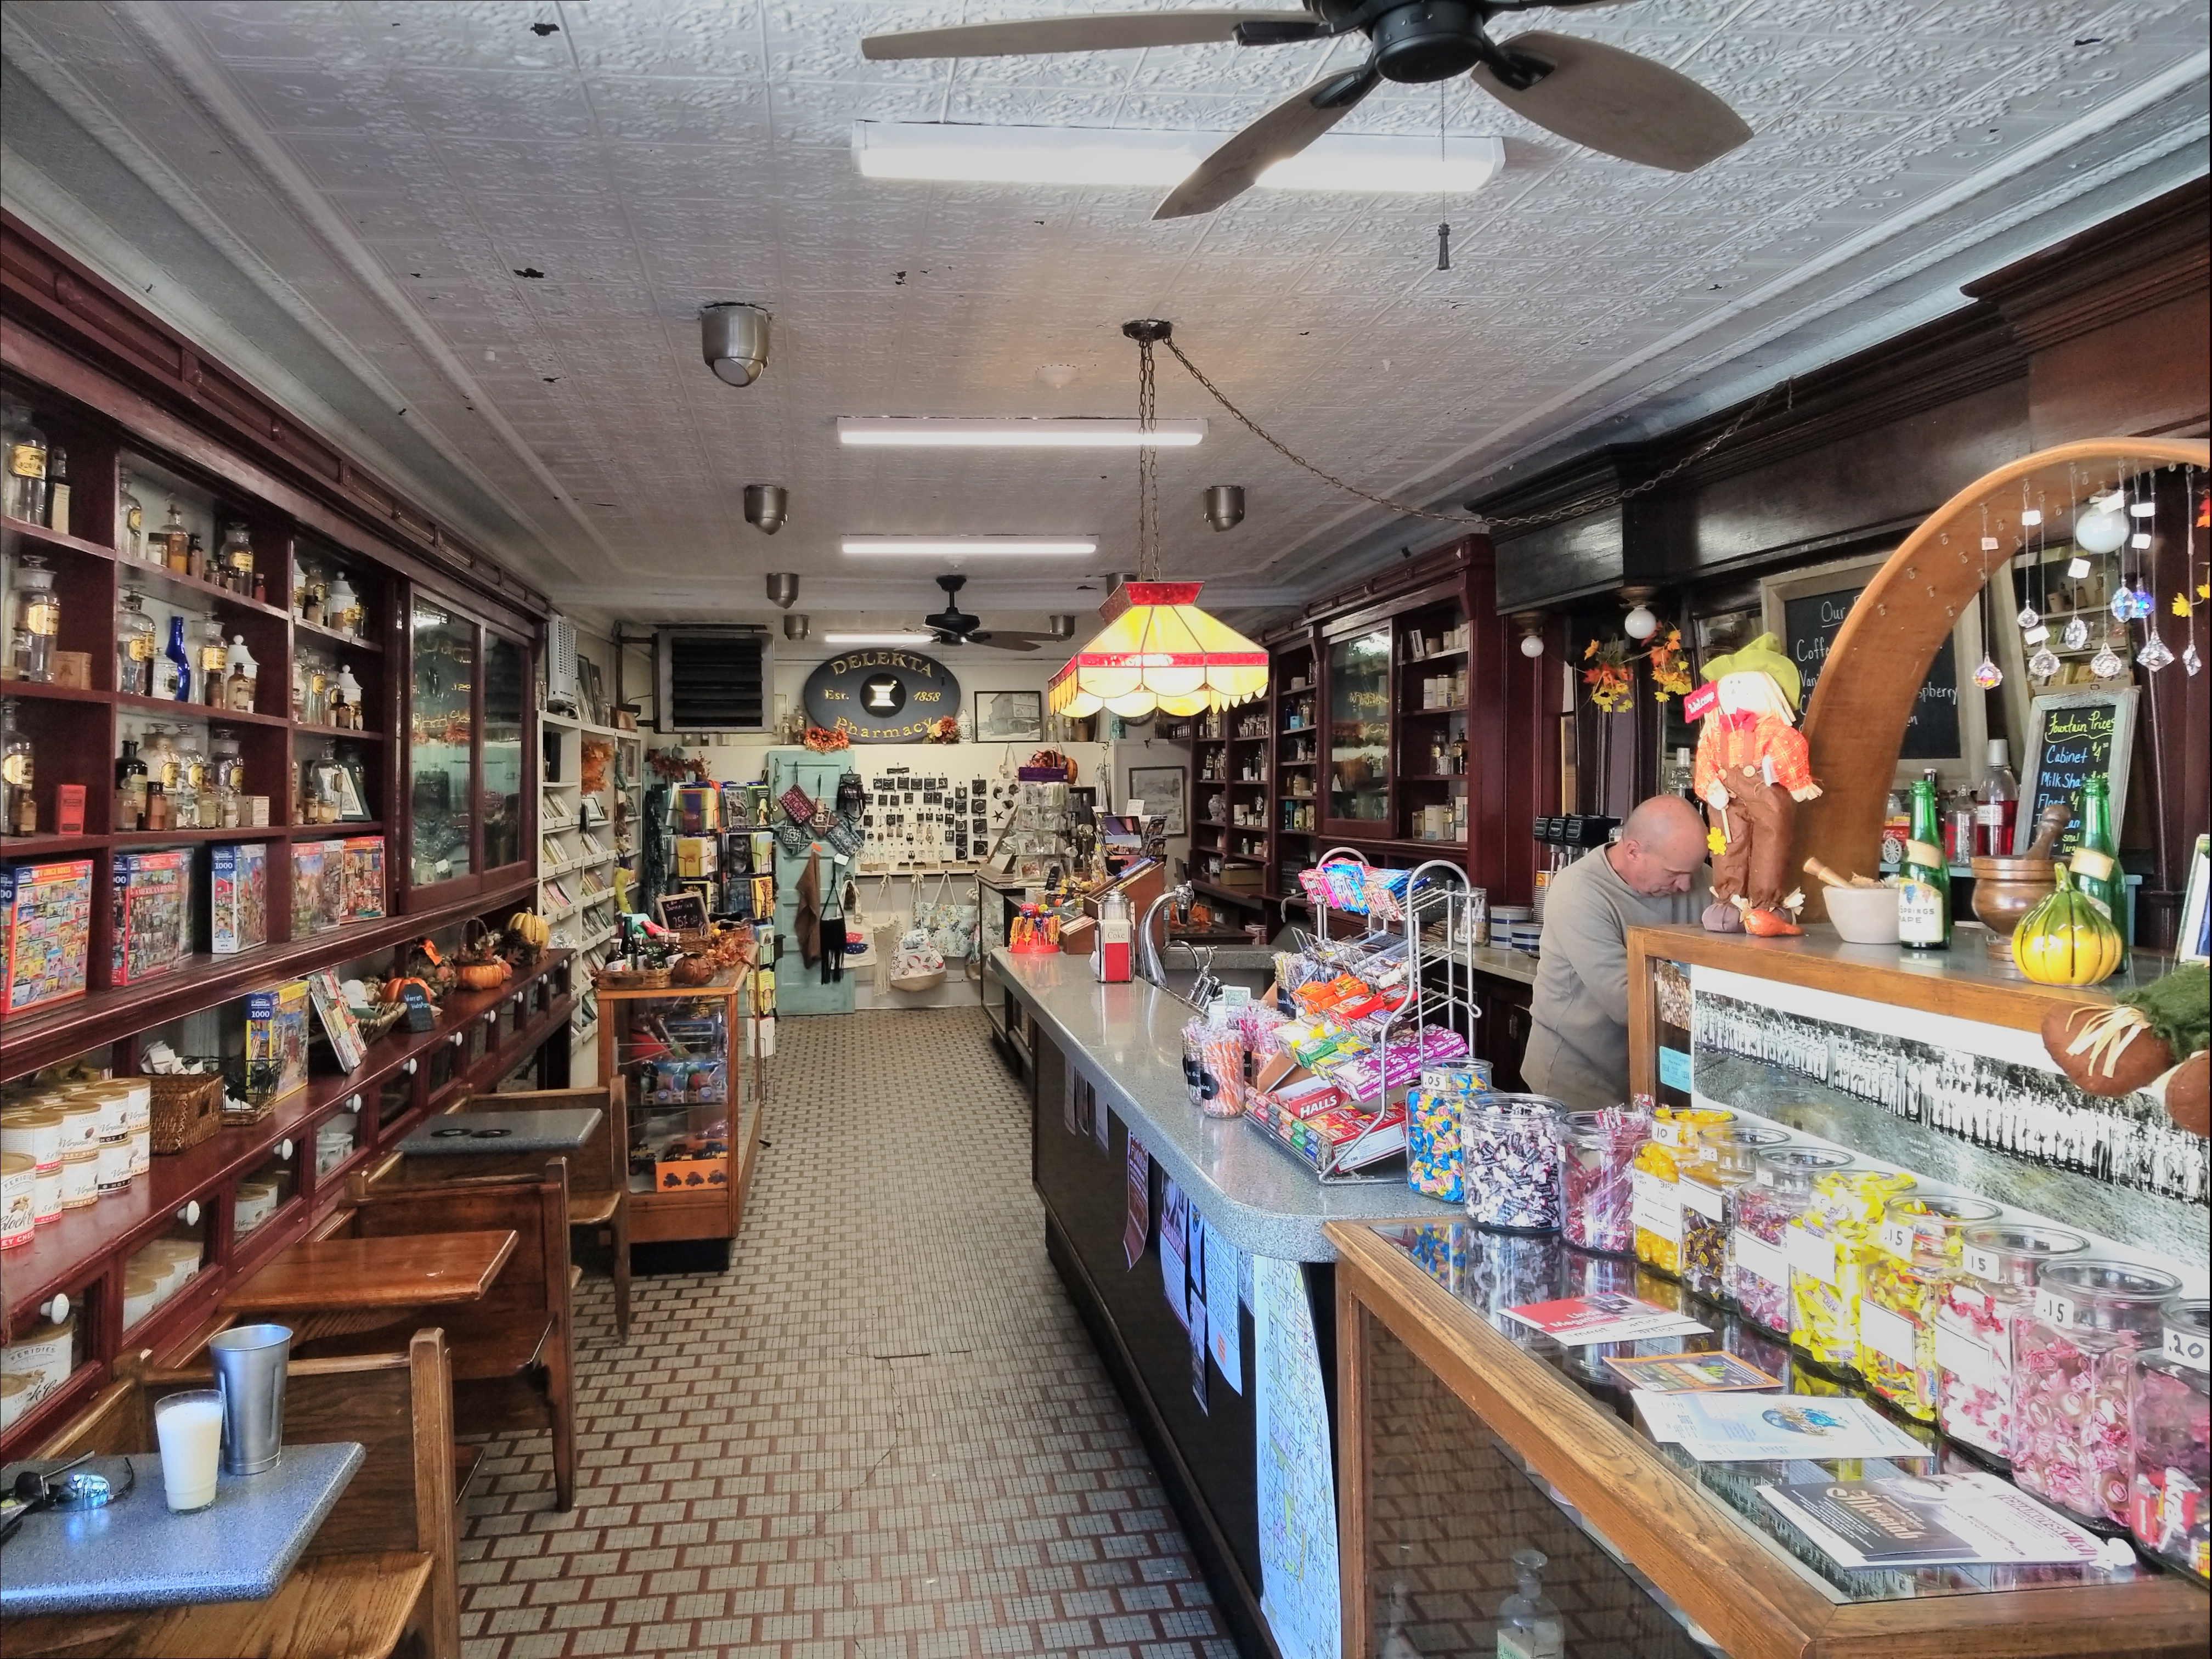 View inside the Delekta Pharmacy, Warren, RI - a destination included in the Life by the Bay Tour.